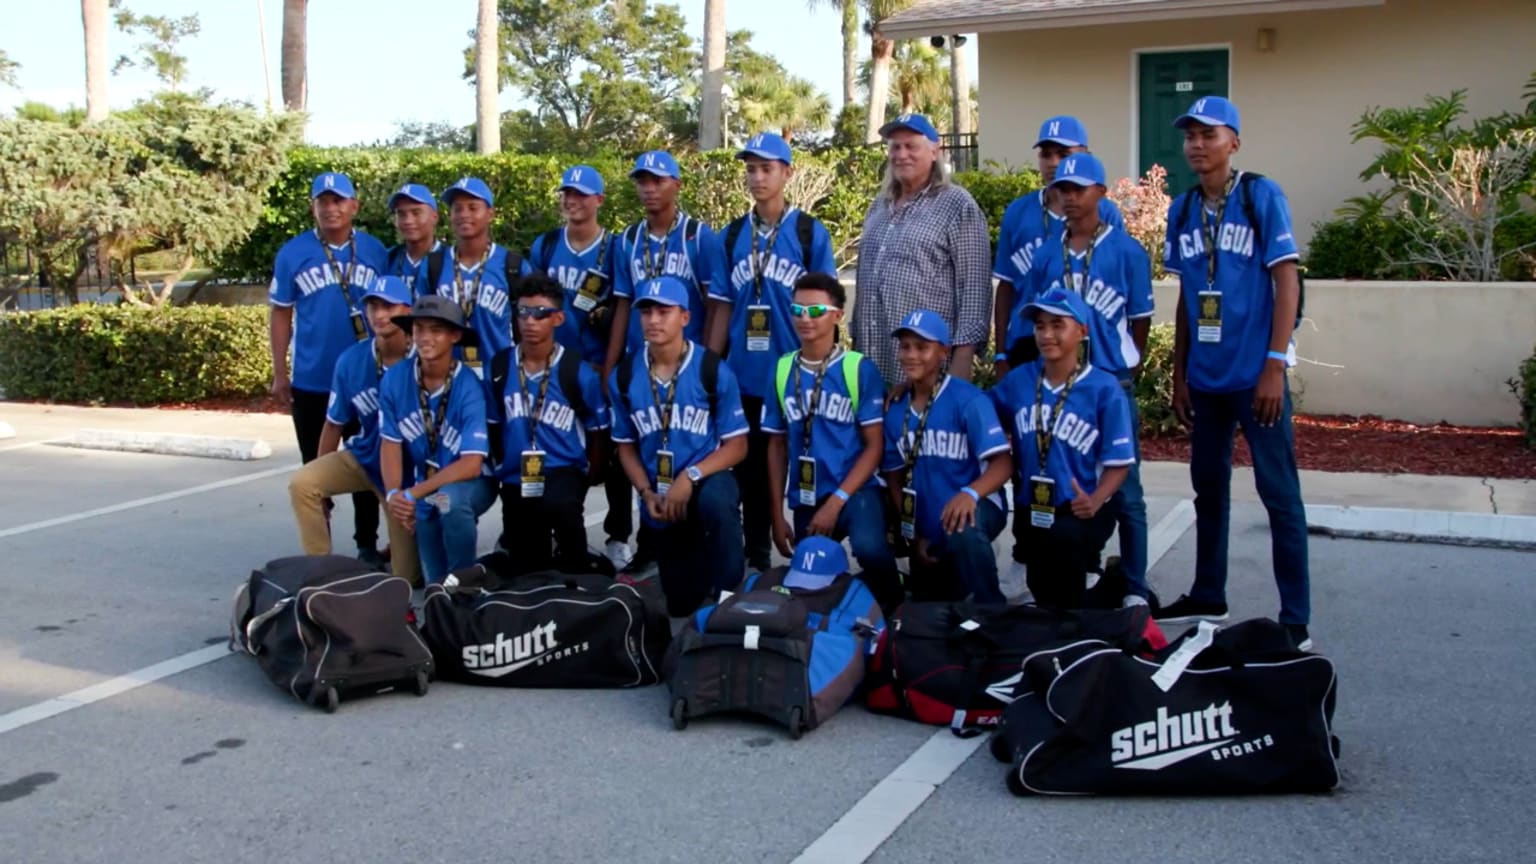 A team of boys in blue uniforms poses for a picture in a parking lot